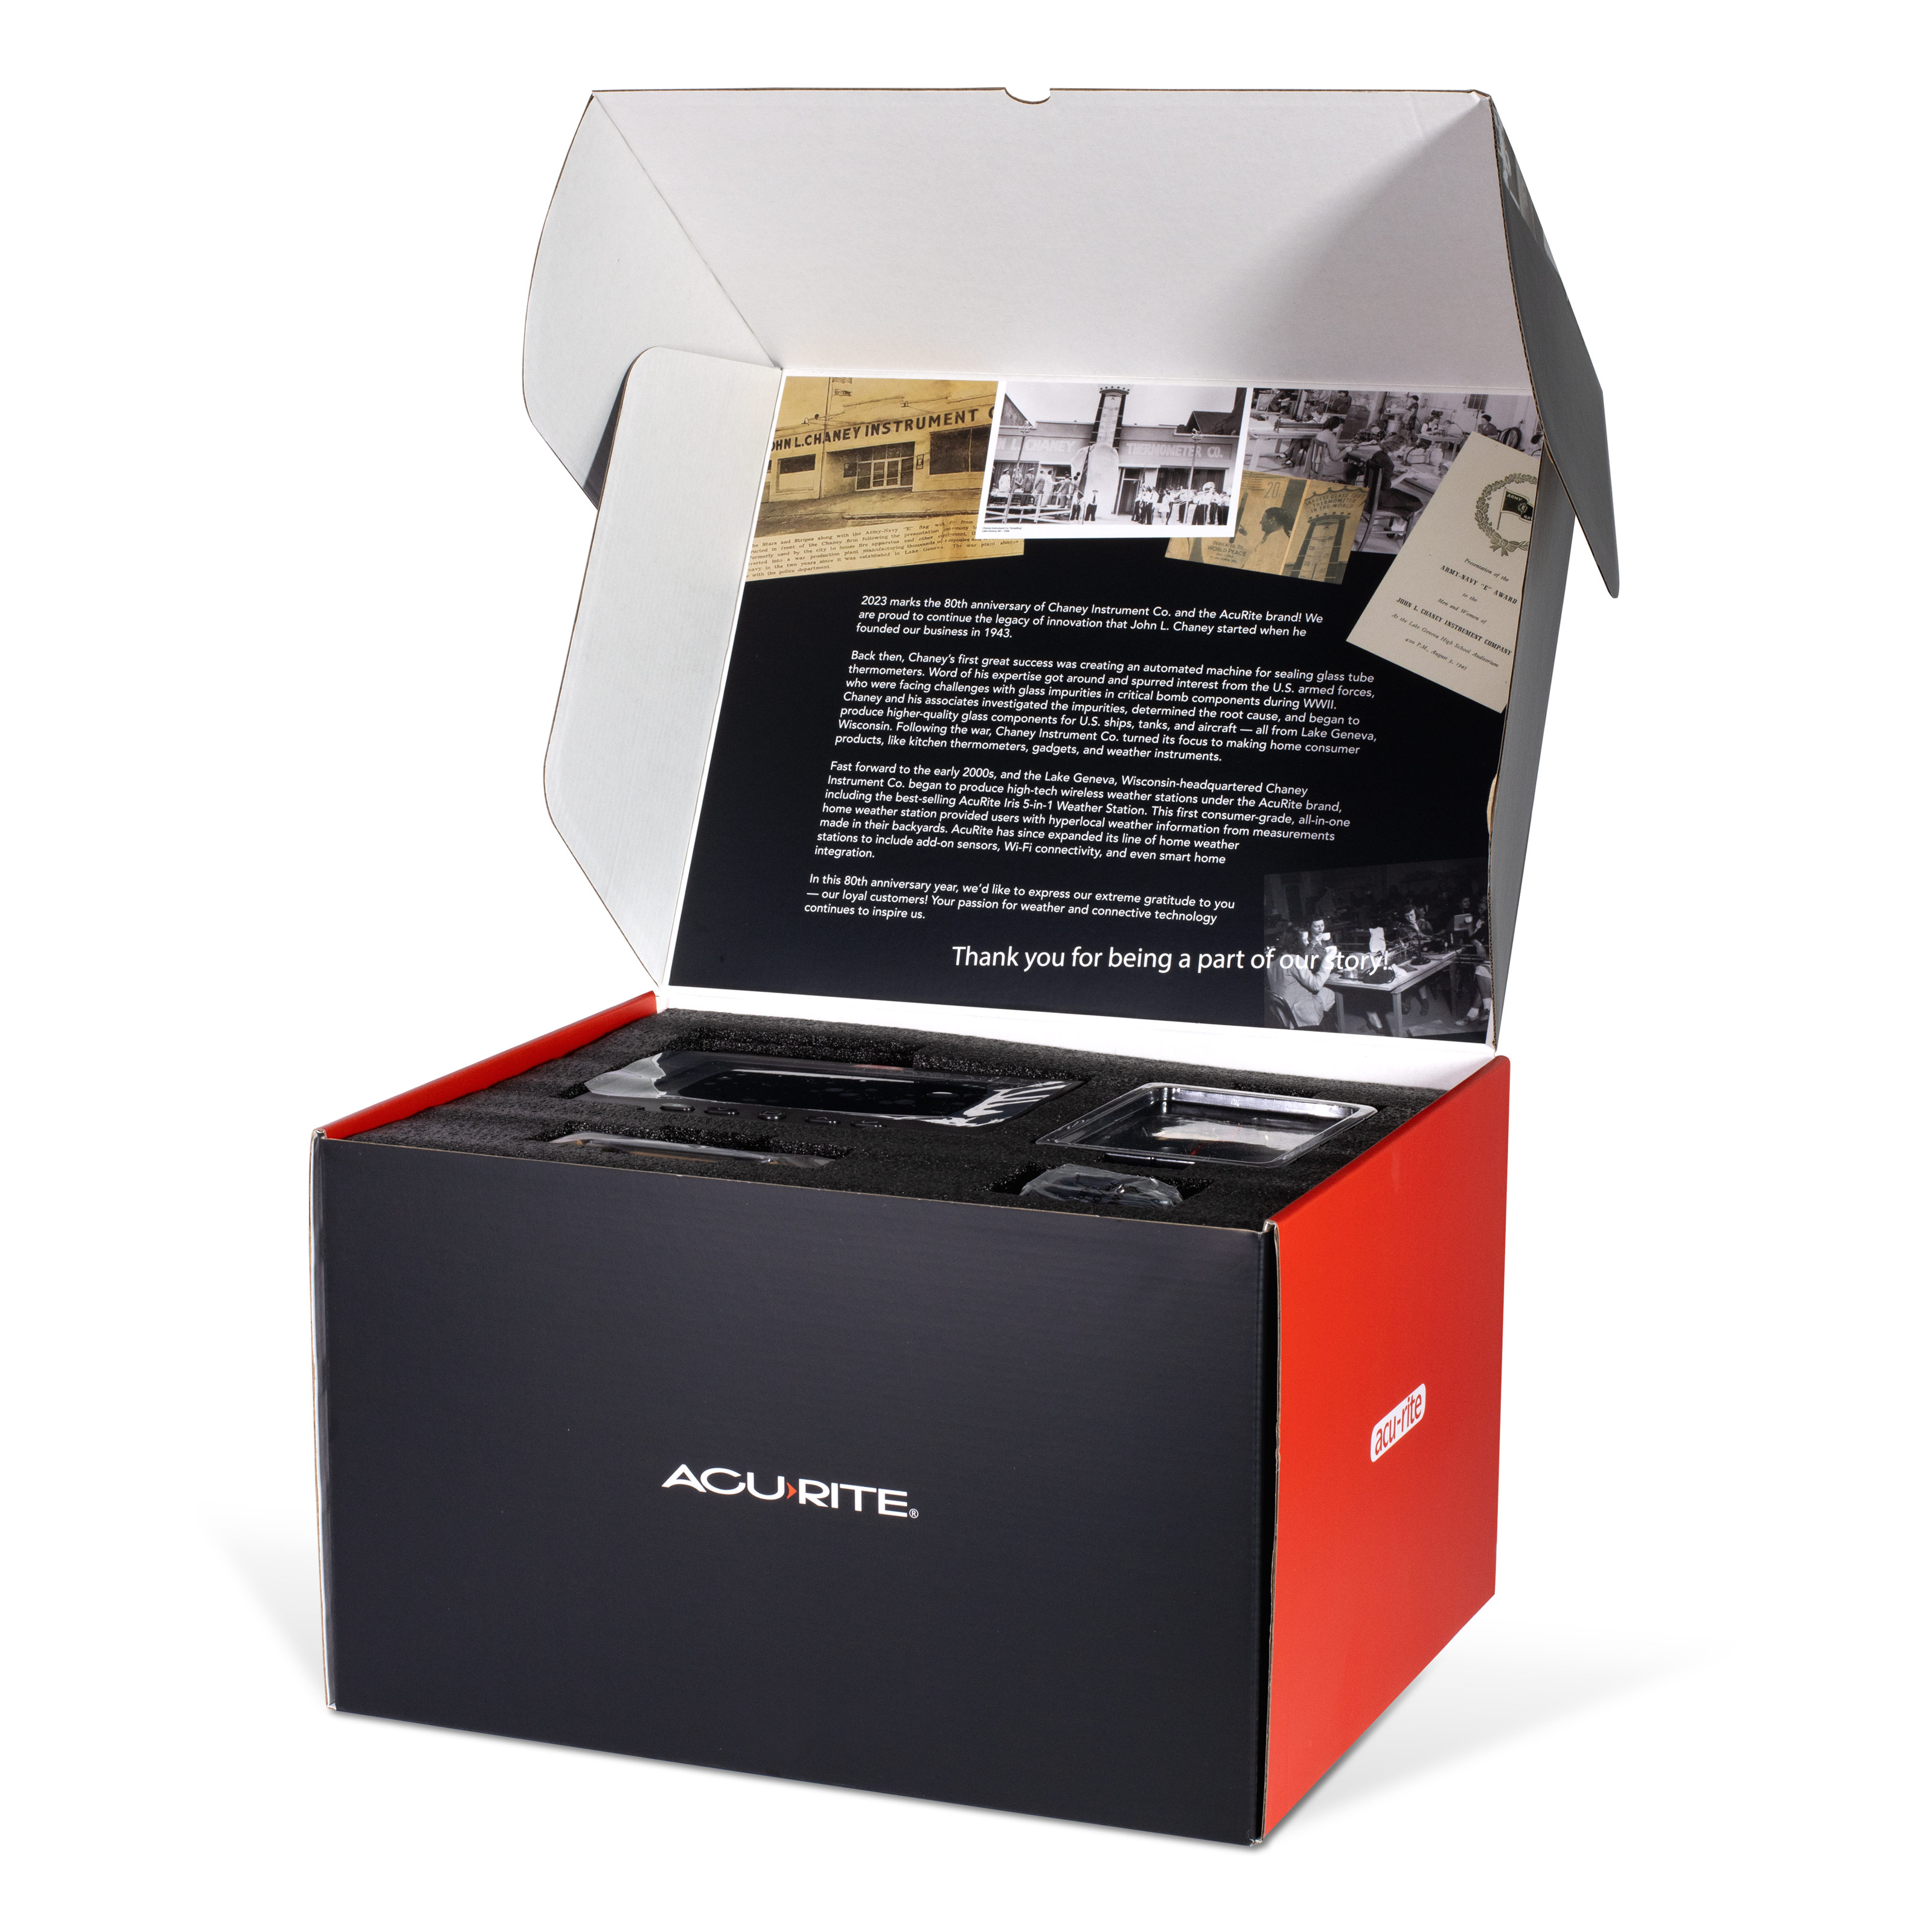 80th Anniversary AcuRite Box Set Packaging